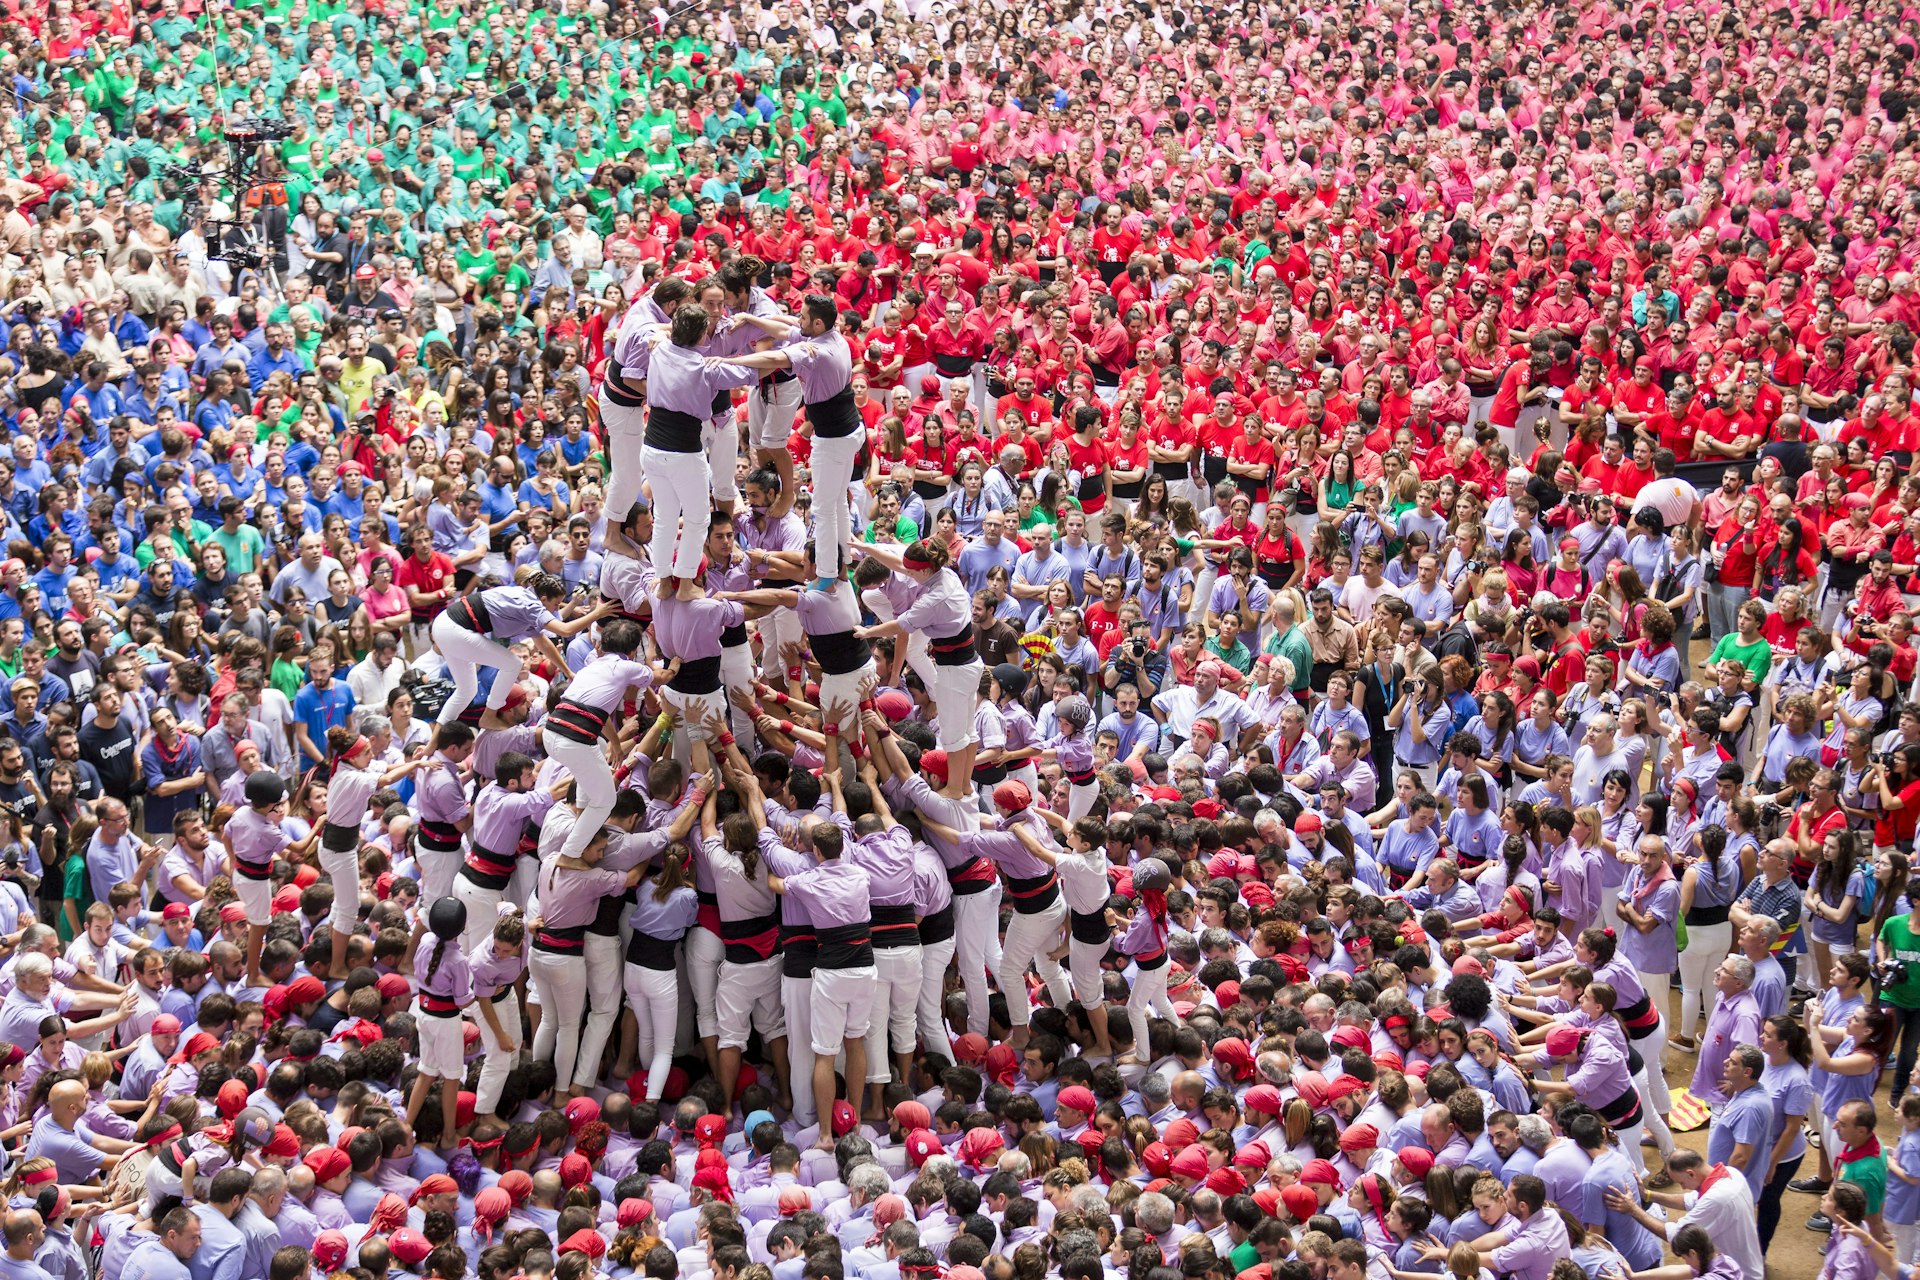 A huge tightly packed crowd shot from above. A tower of people standing on each other's shoulders is the focal point